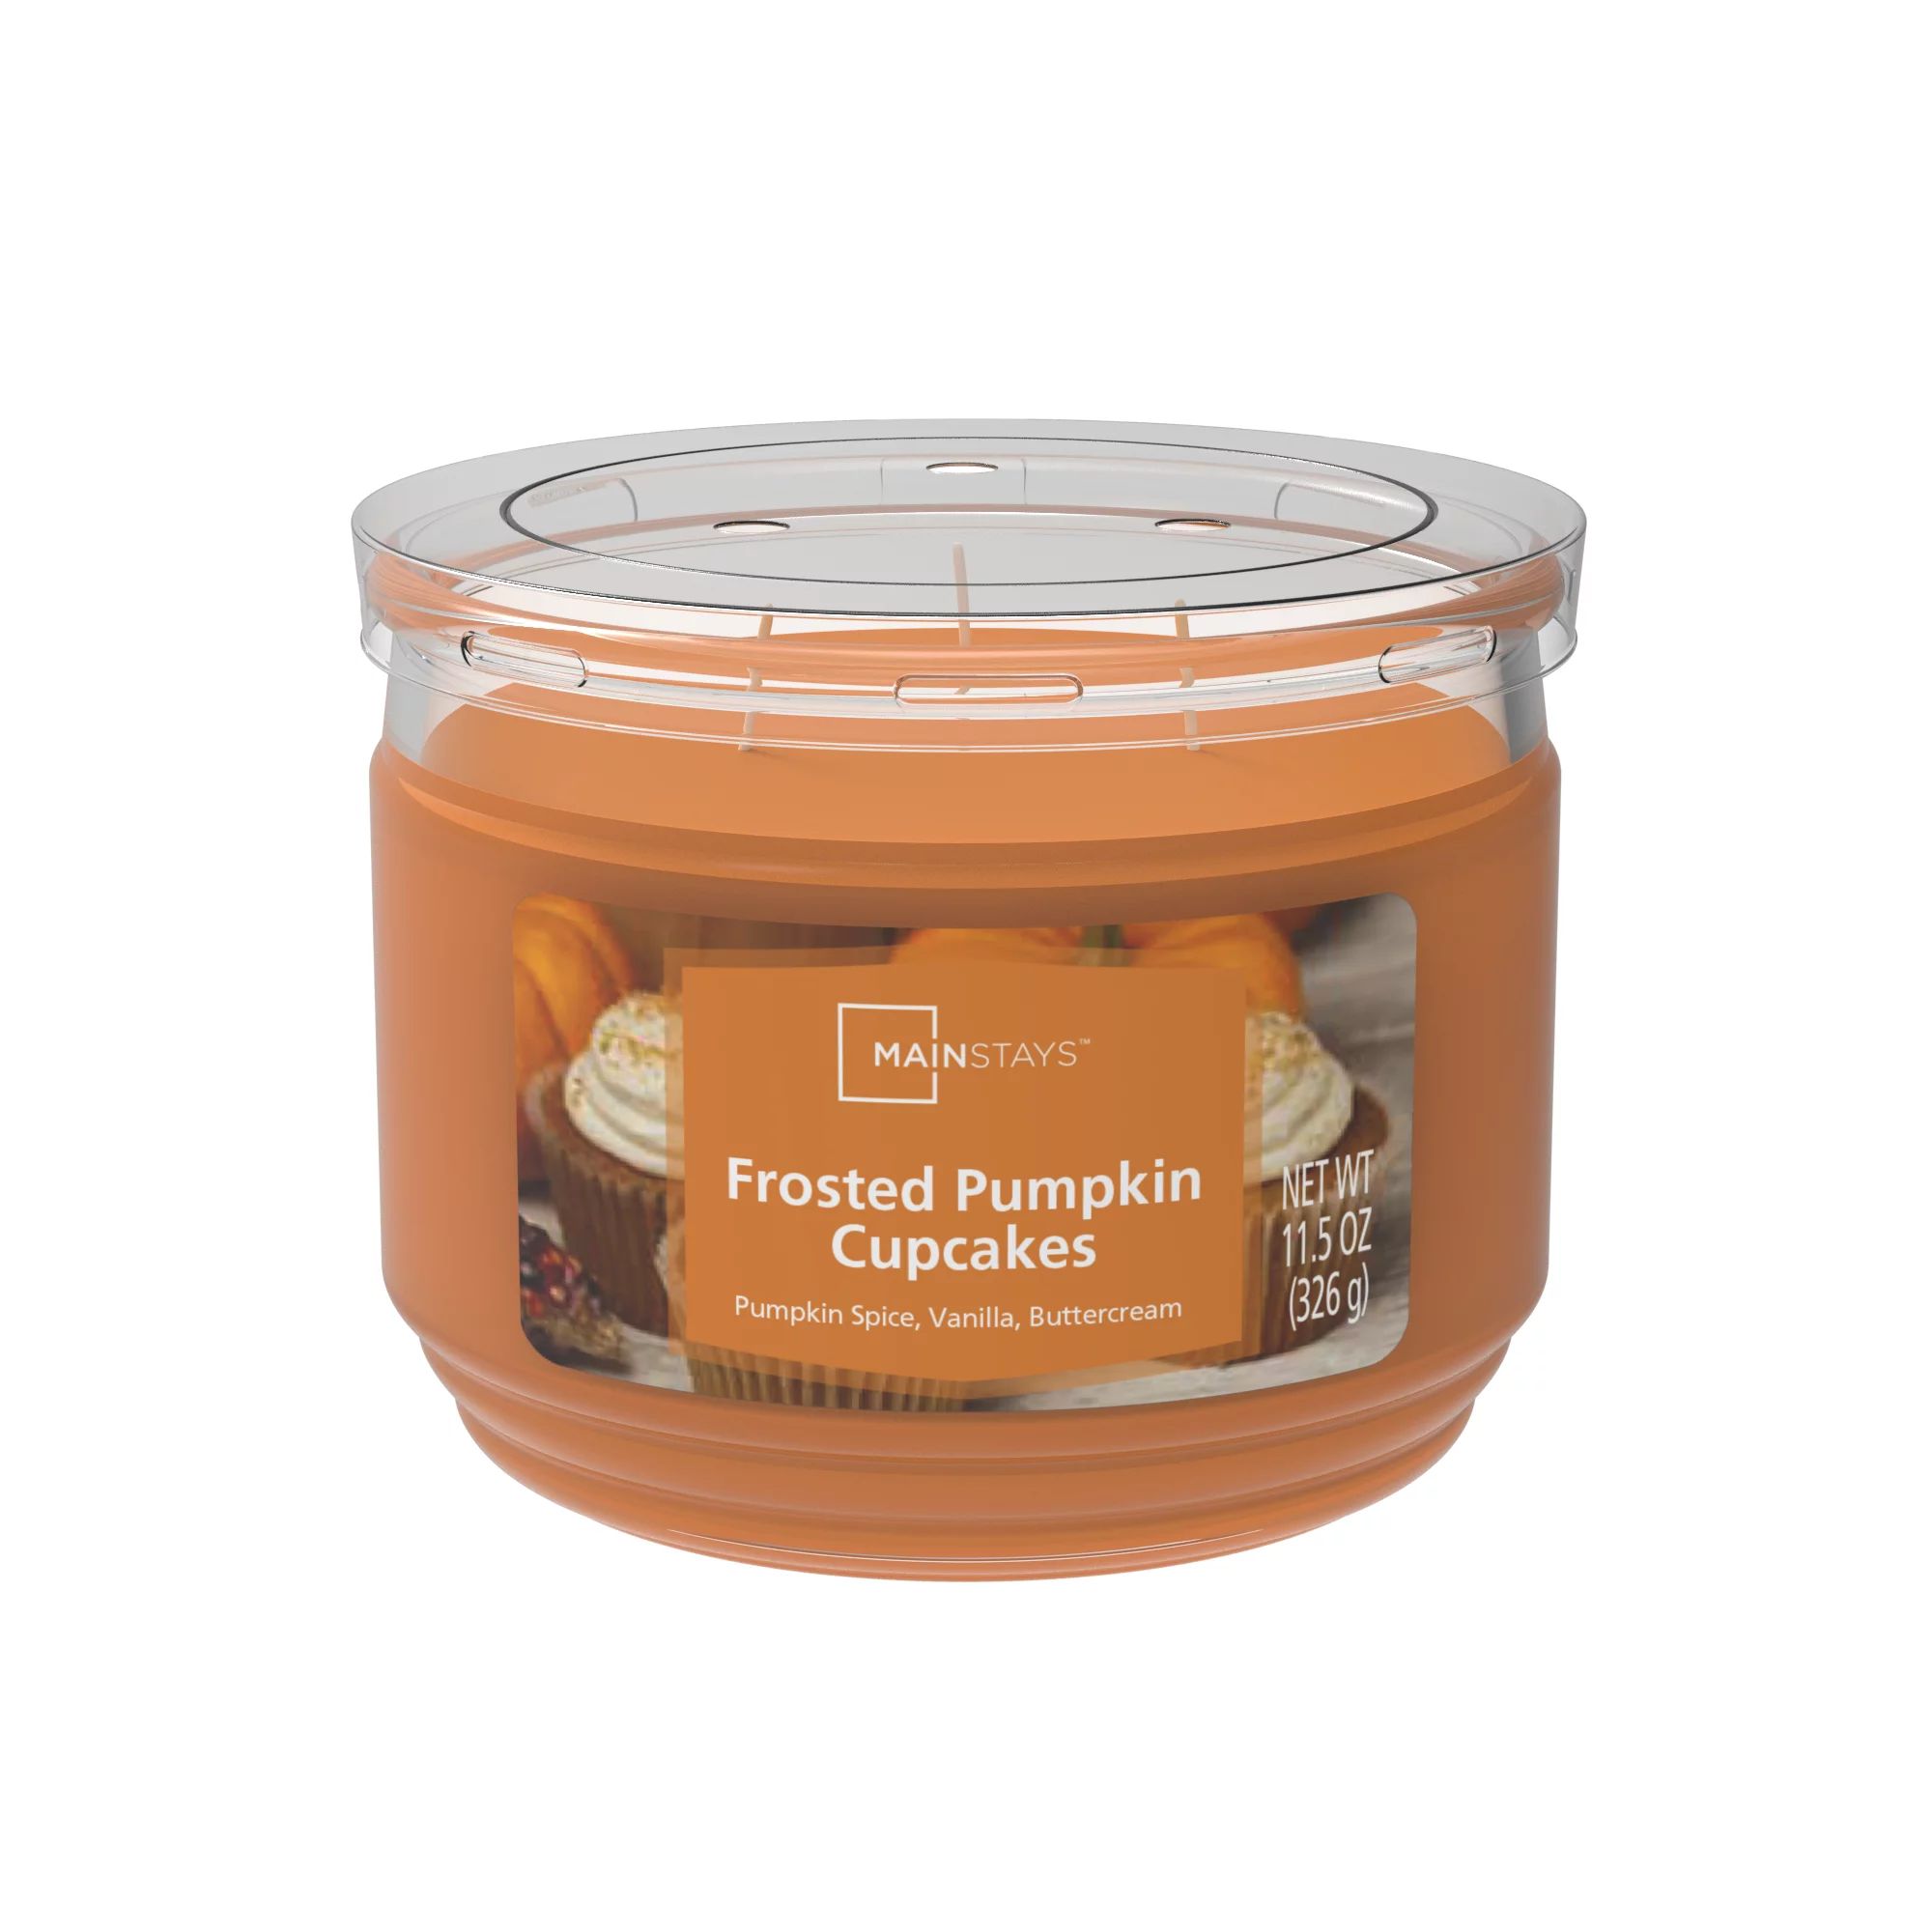 Mainstays Frosted Pumpkin Cupcakes Scented 3-Wick Glass Jar Candle, 11.5 oz. | Walmart (US)